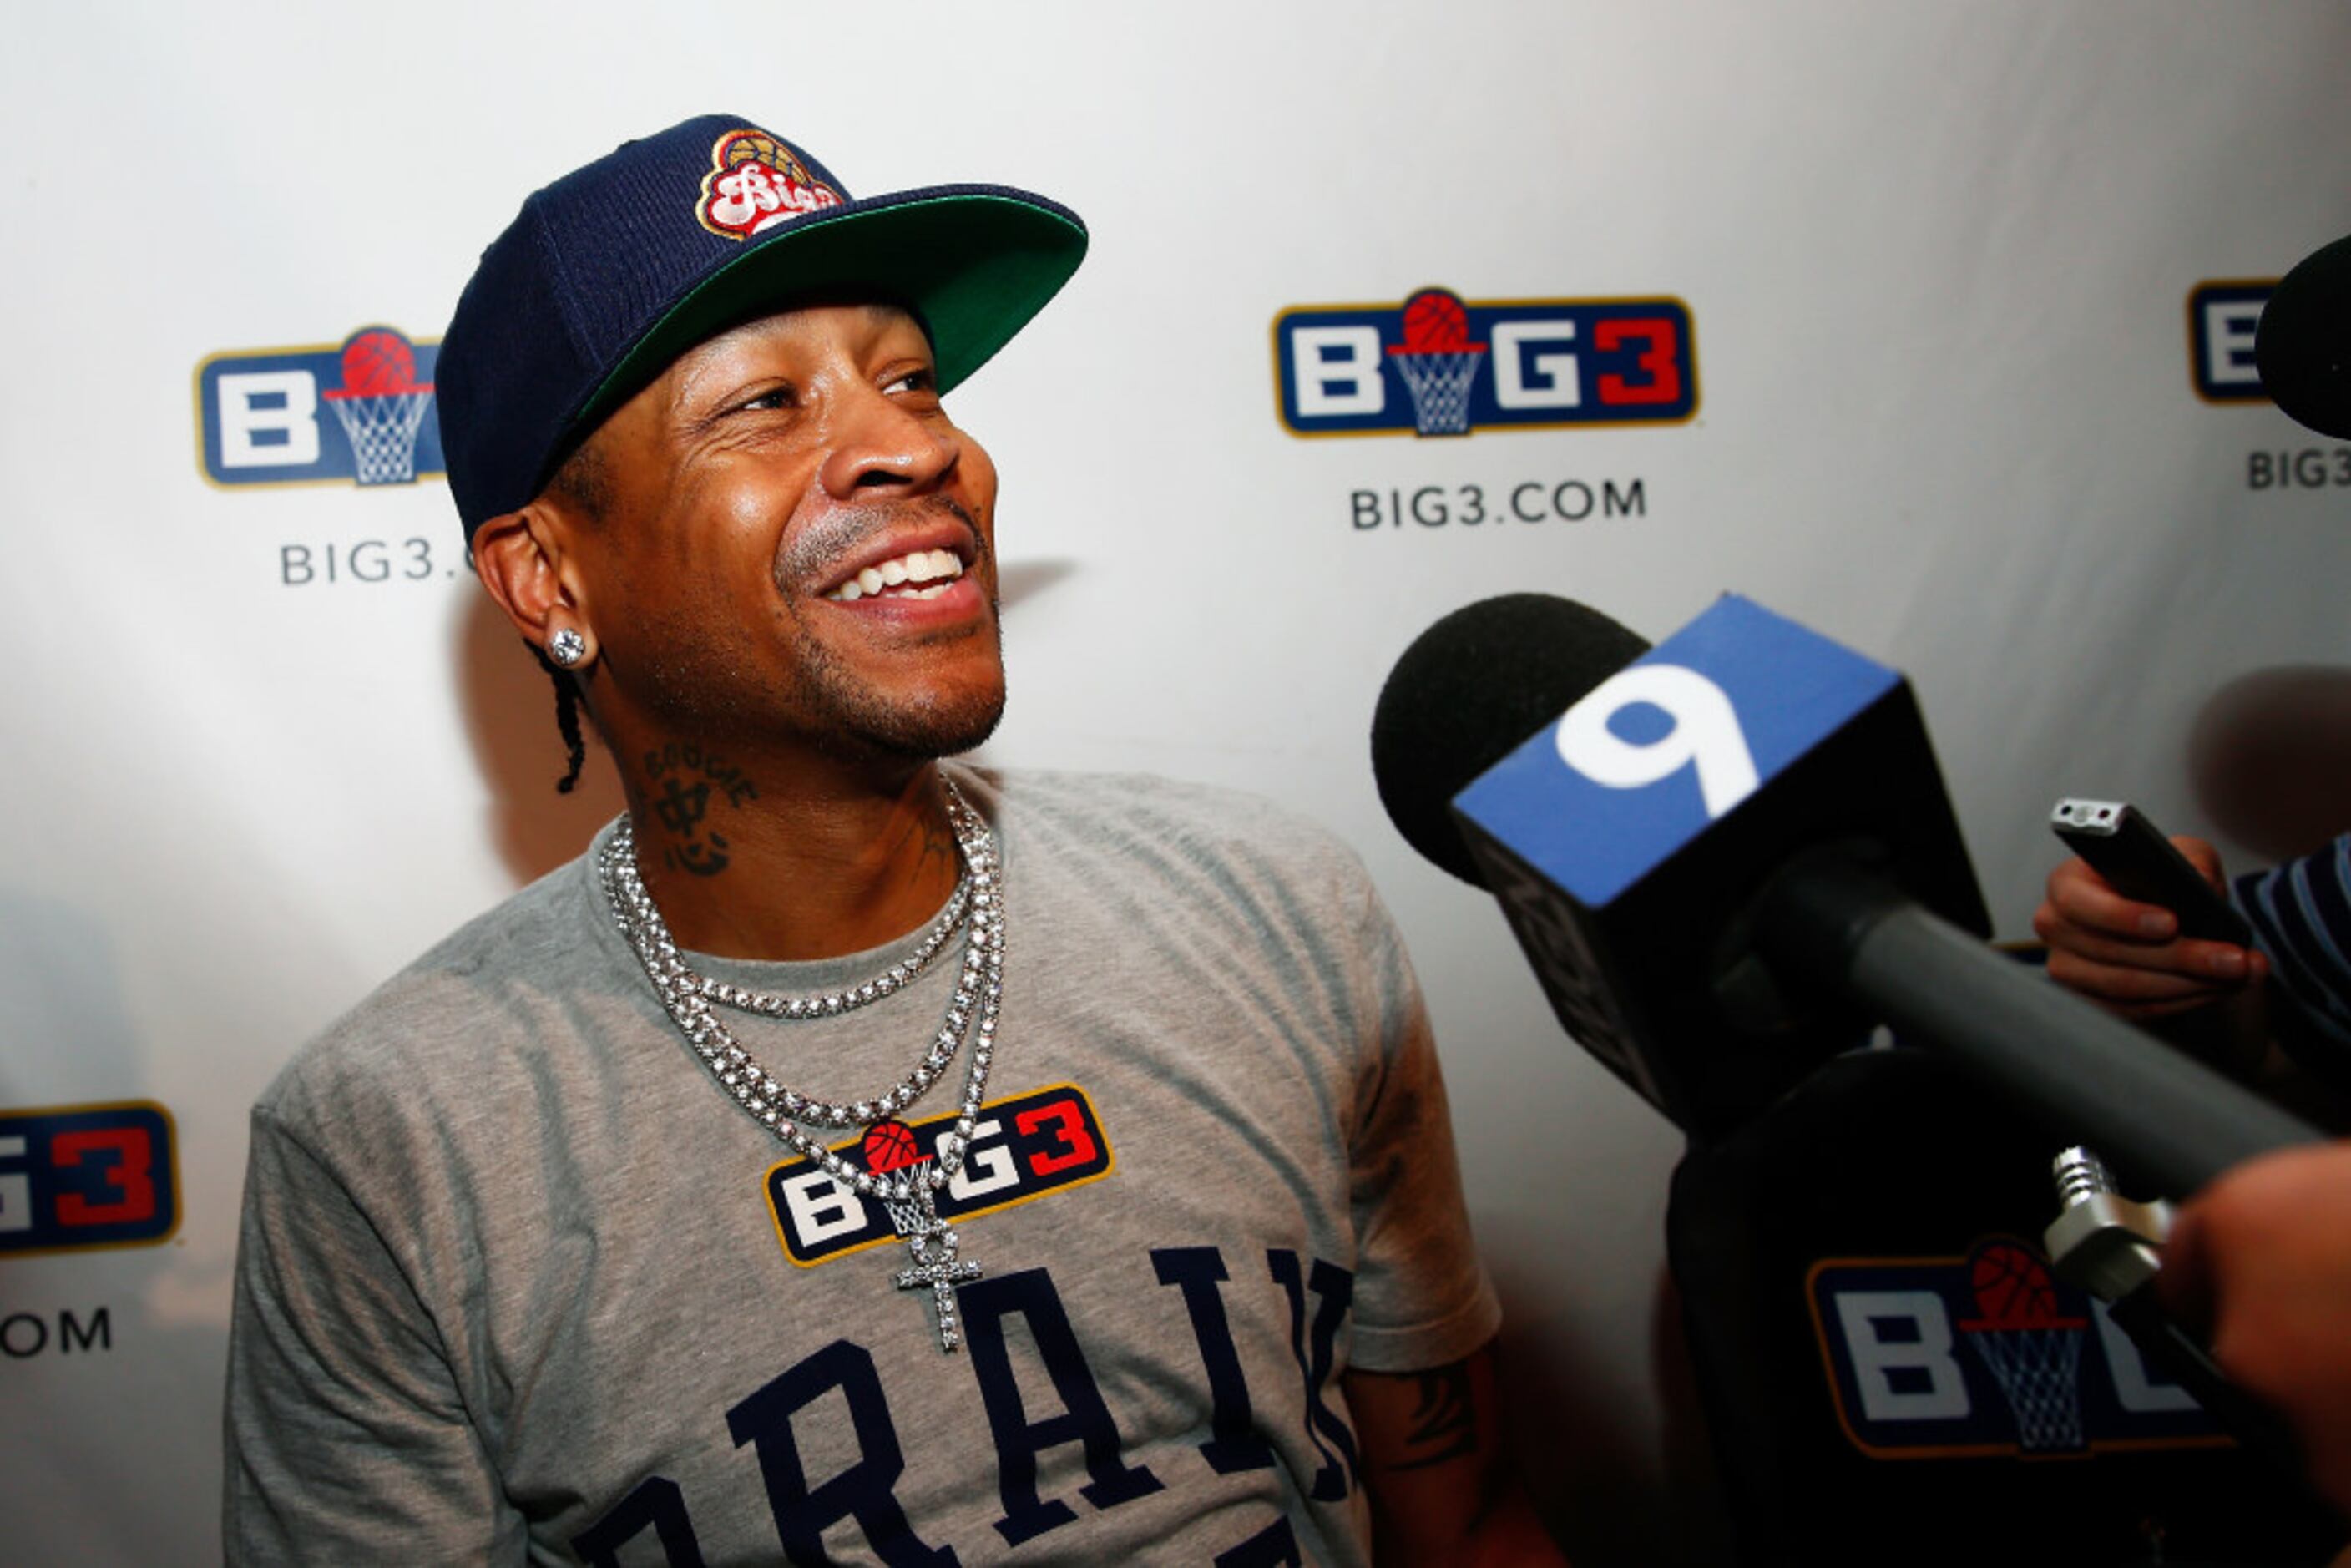 BASKETBALL: Big3 league has close games, not much Iverson